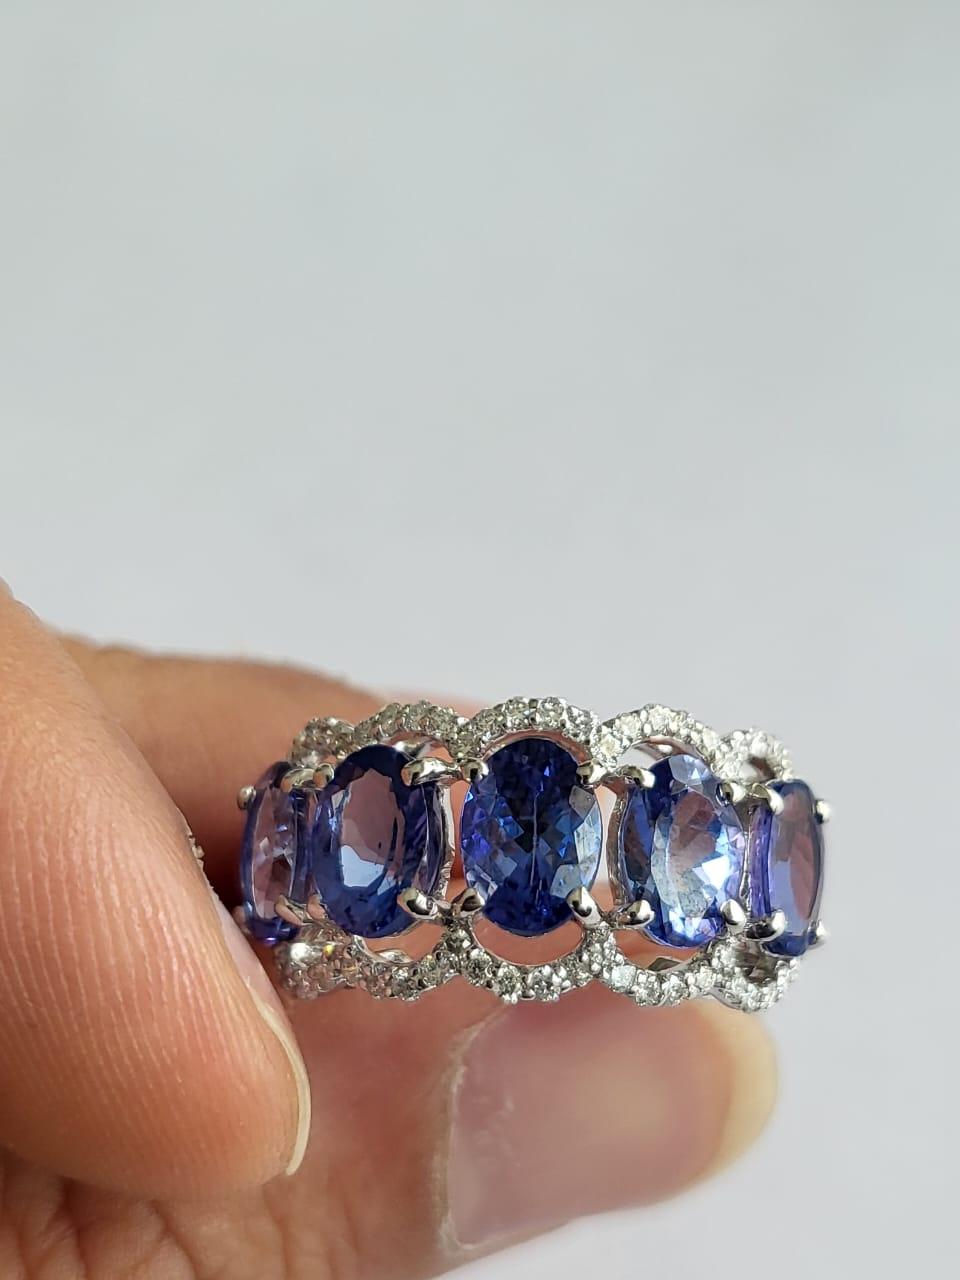 A very gorgeous and beautiful, Tanzanite Band / Wedding Ring set in 18K Gold & Diamonds. The weight of the Tanzanite ovals is 4.17 carats. The Tanzanites are responsibly sourced from Tanzania. The weight of the Diamonds is 0.47 carats. Net Gold